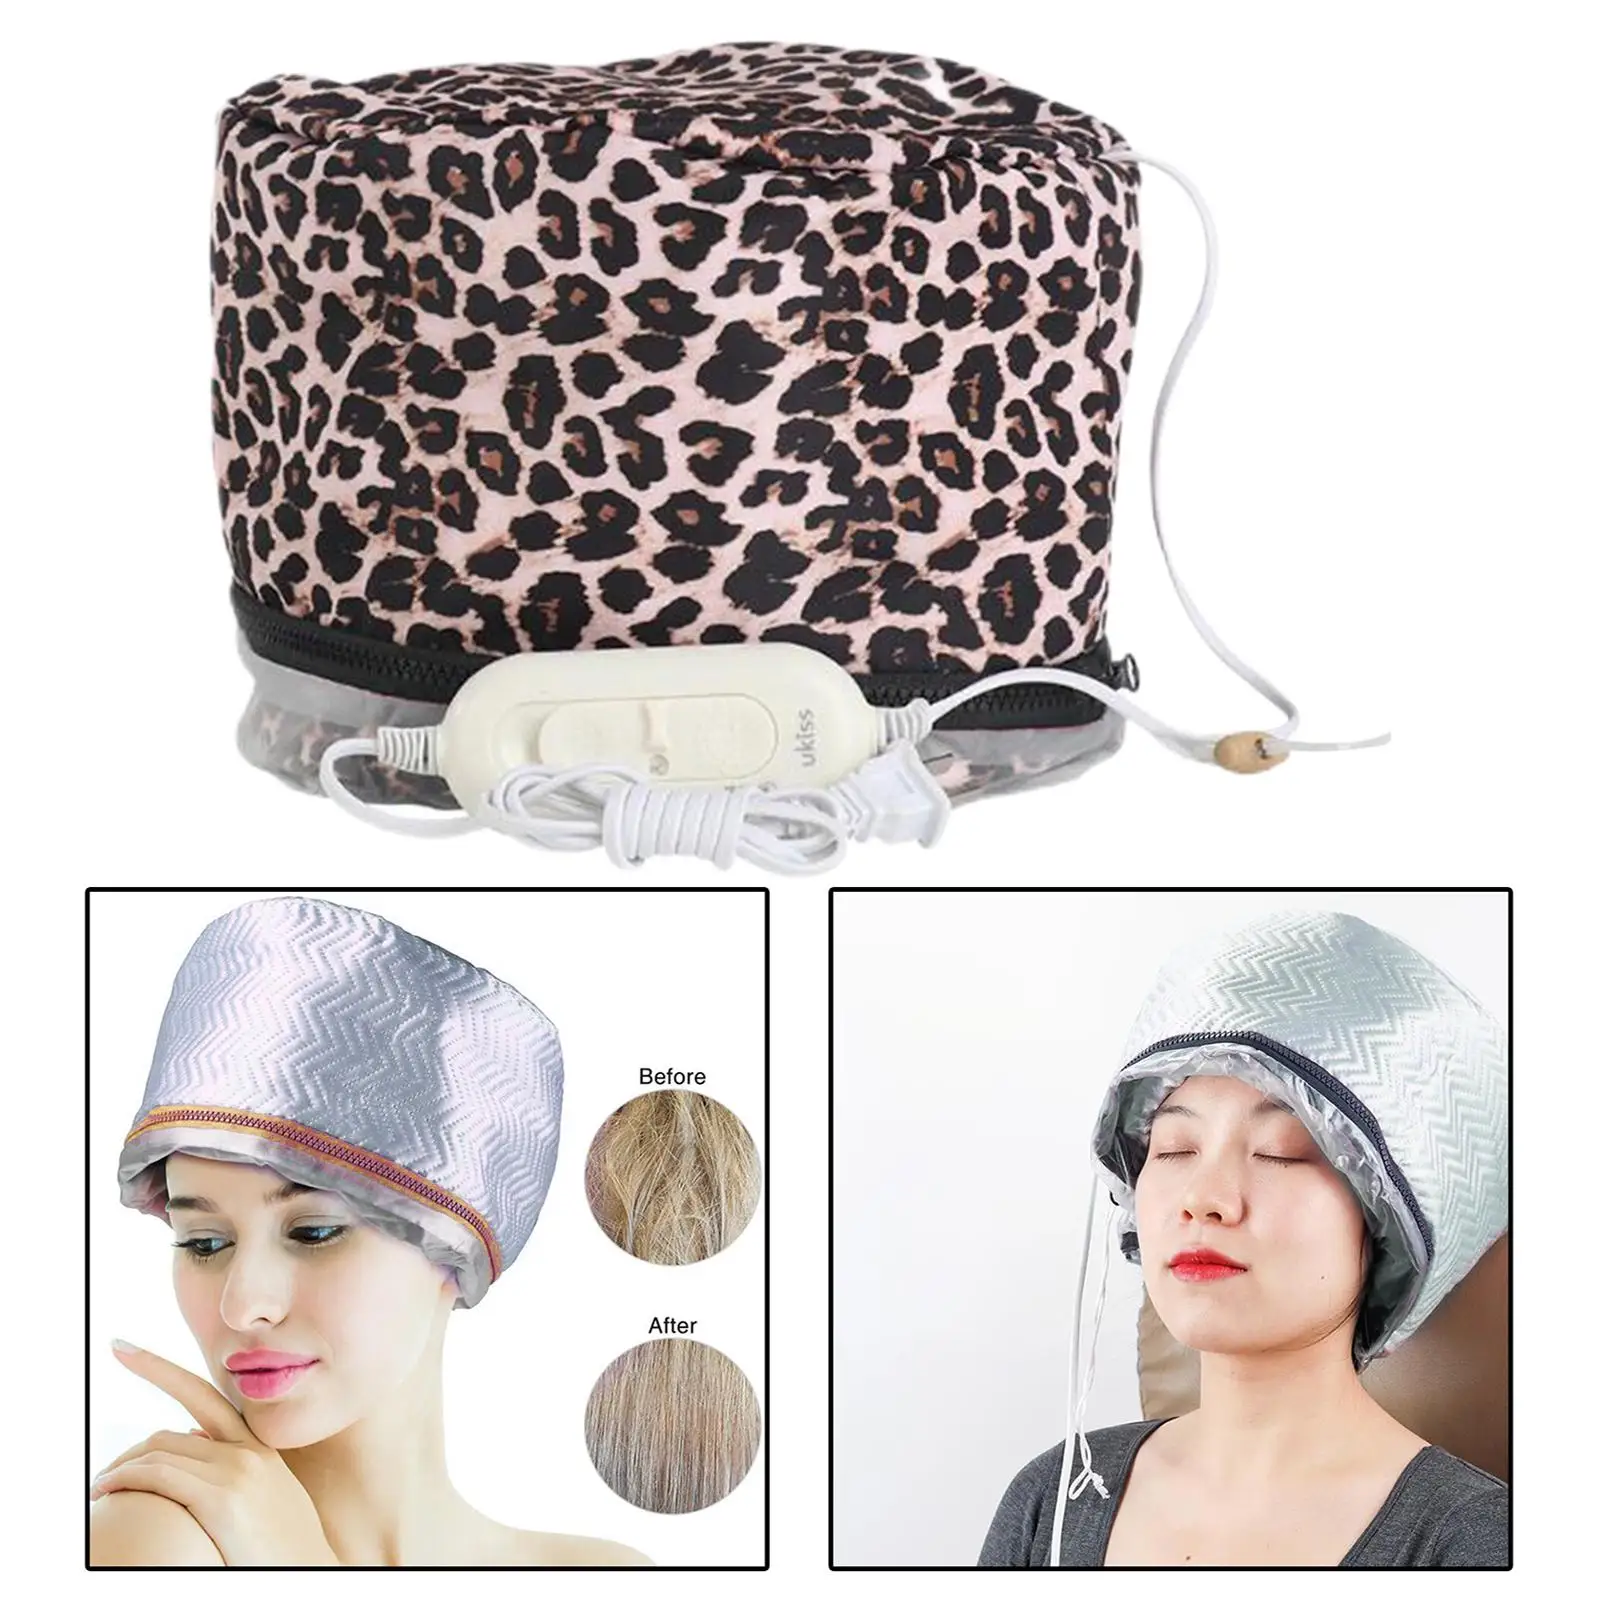 Hair Steamer Heating Hat Deep Conditioning Moisturize Beauty Steamer Thermal Caps Heat Caps 3 Level Temperature Control Home US